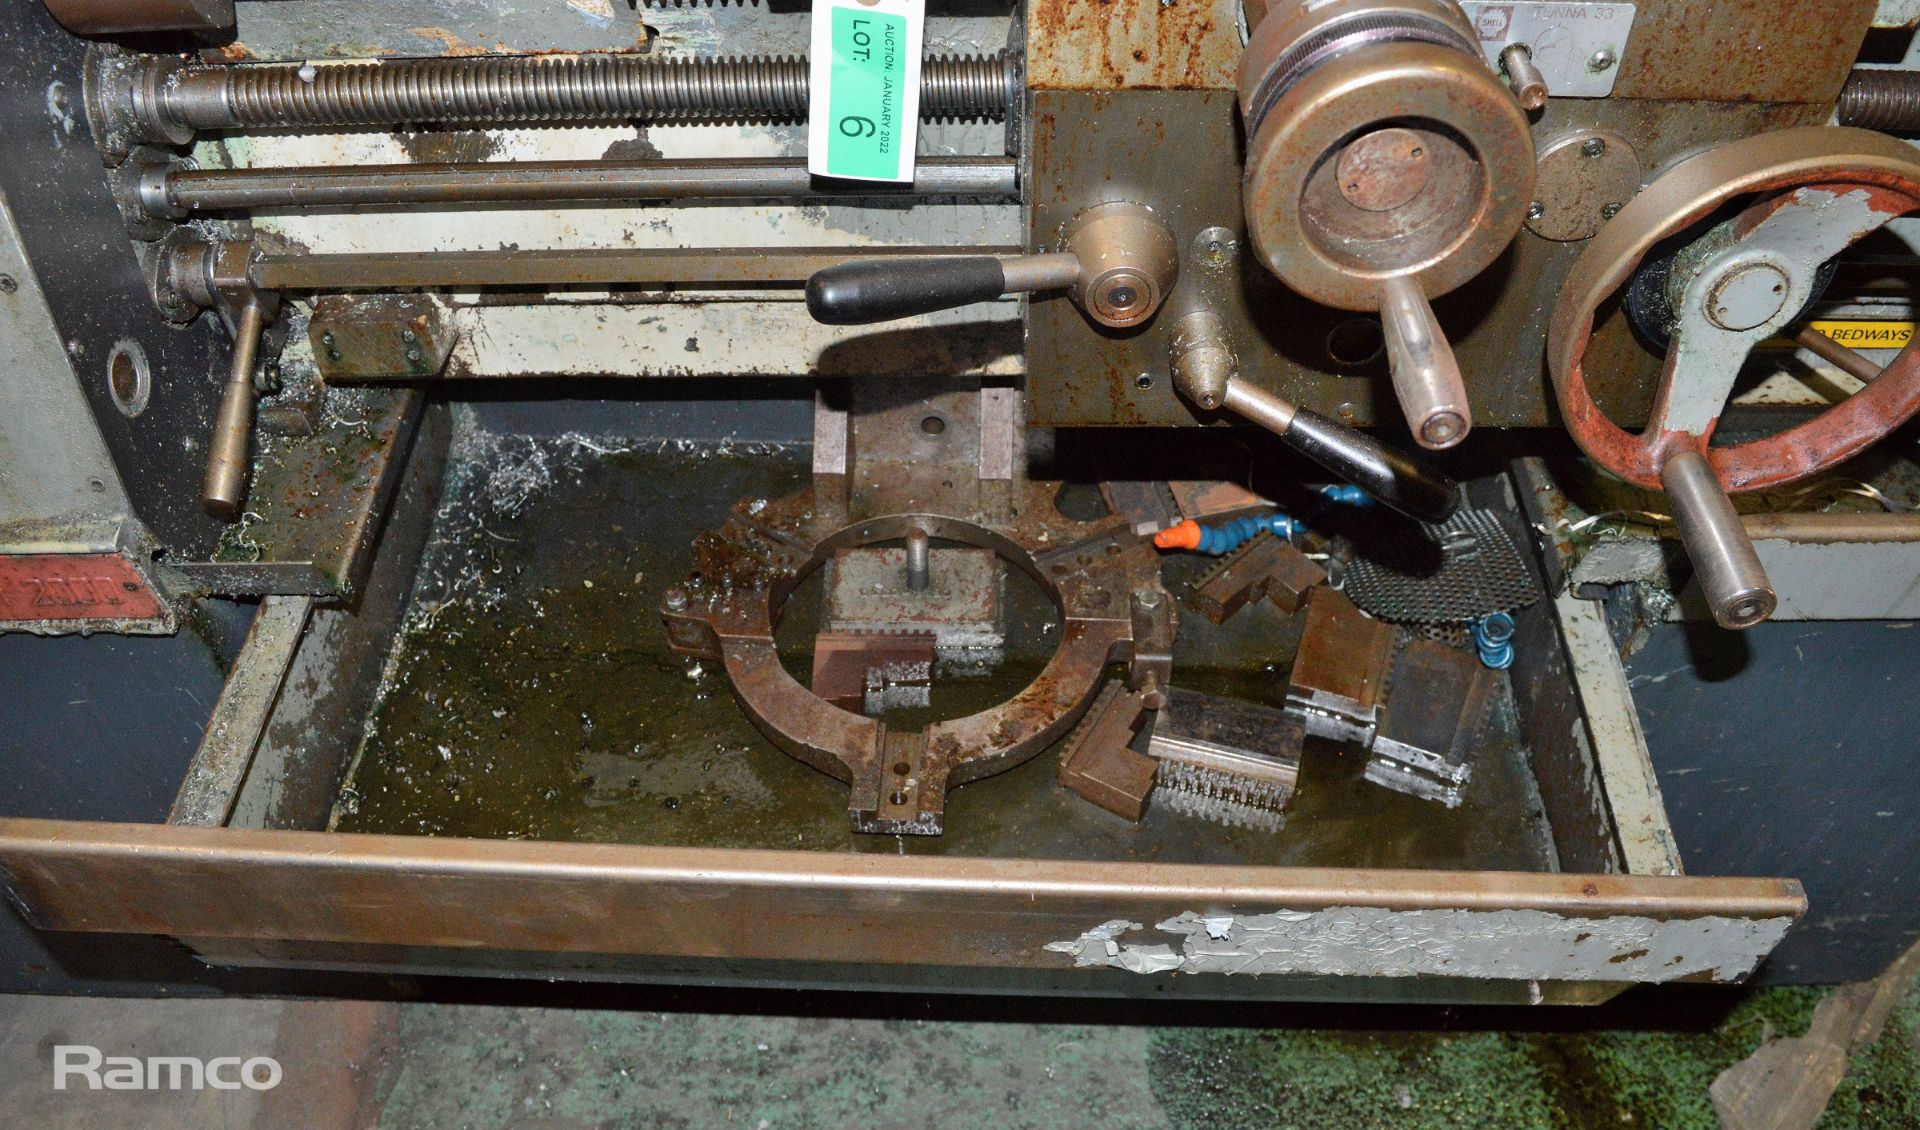 Colchester Triumph 2000 Lathe - 3 Jaw Chuck with teeth, Tail stock, Tool post holder - Image 10 of 11